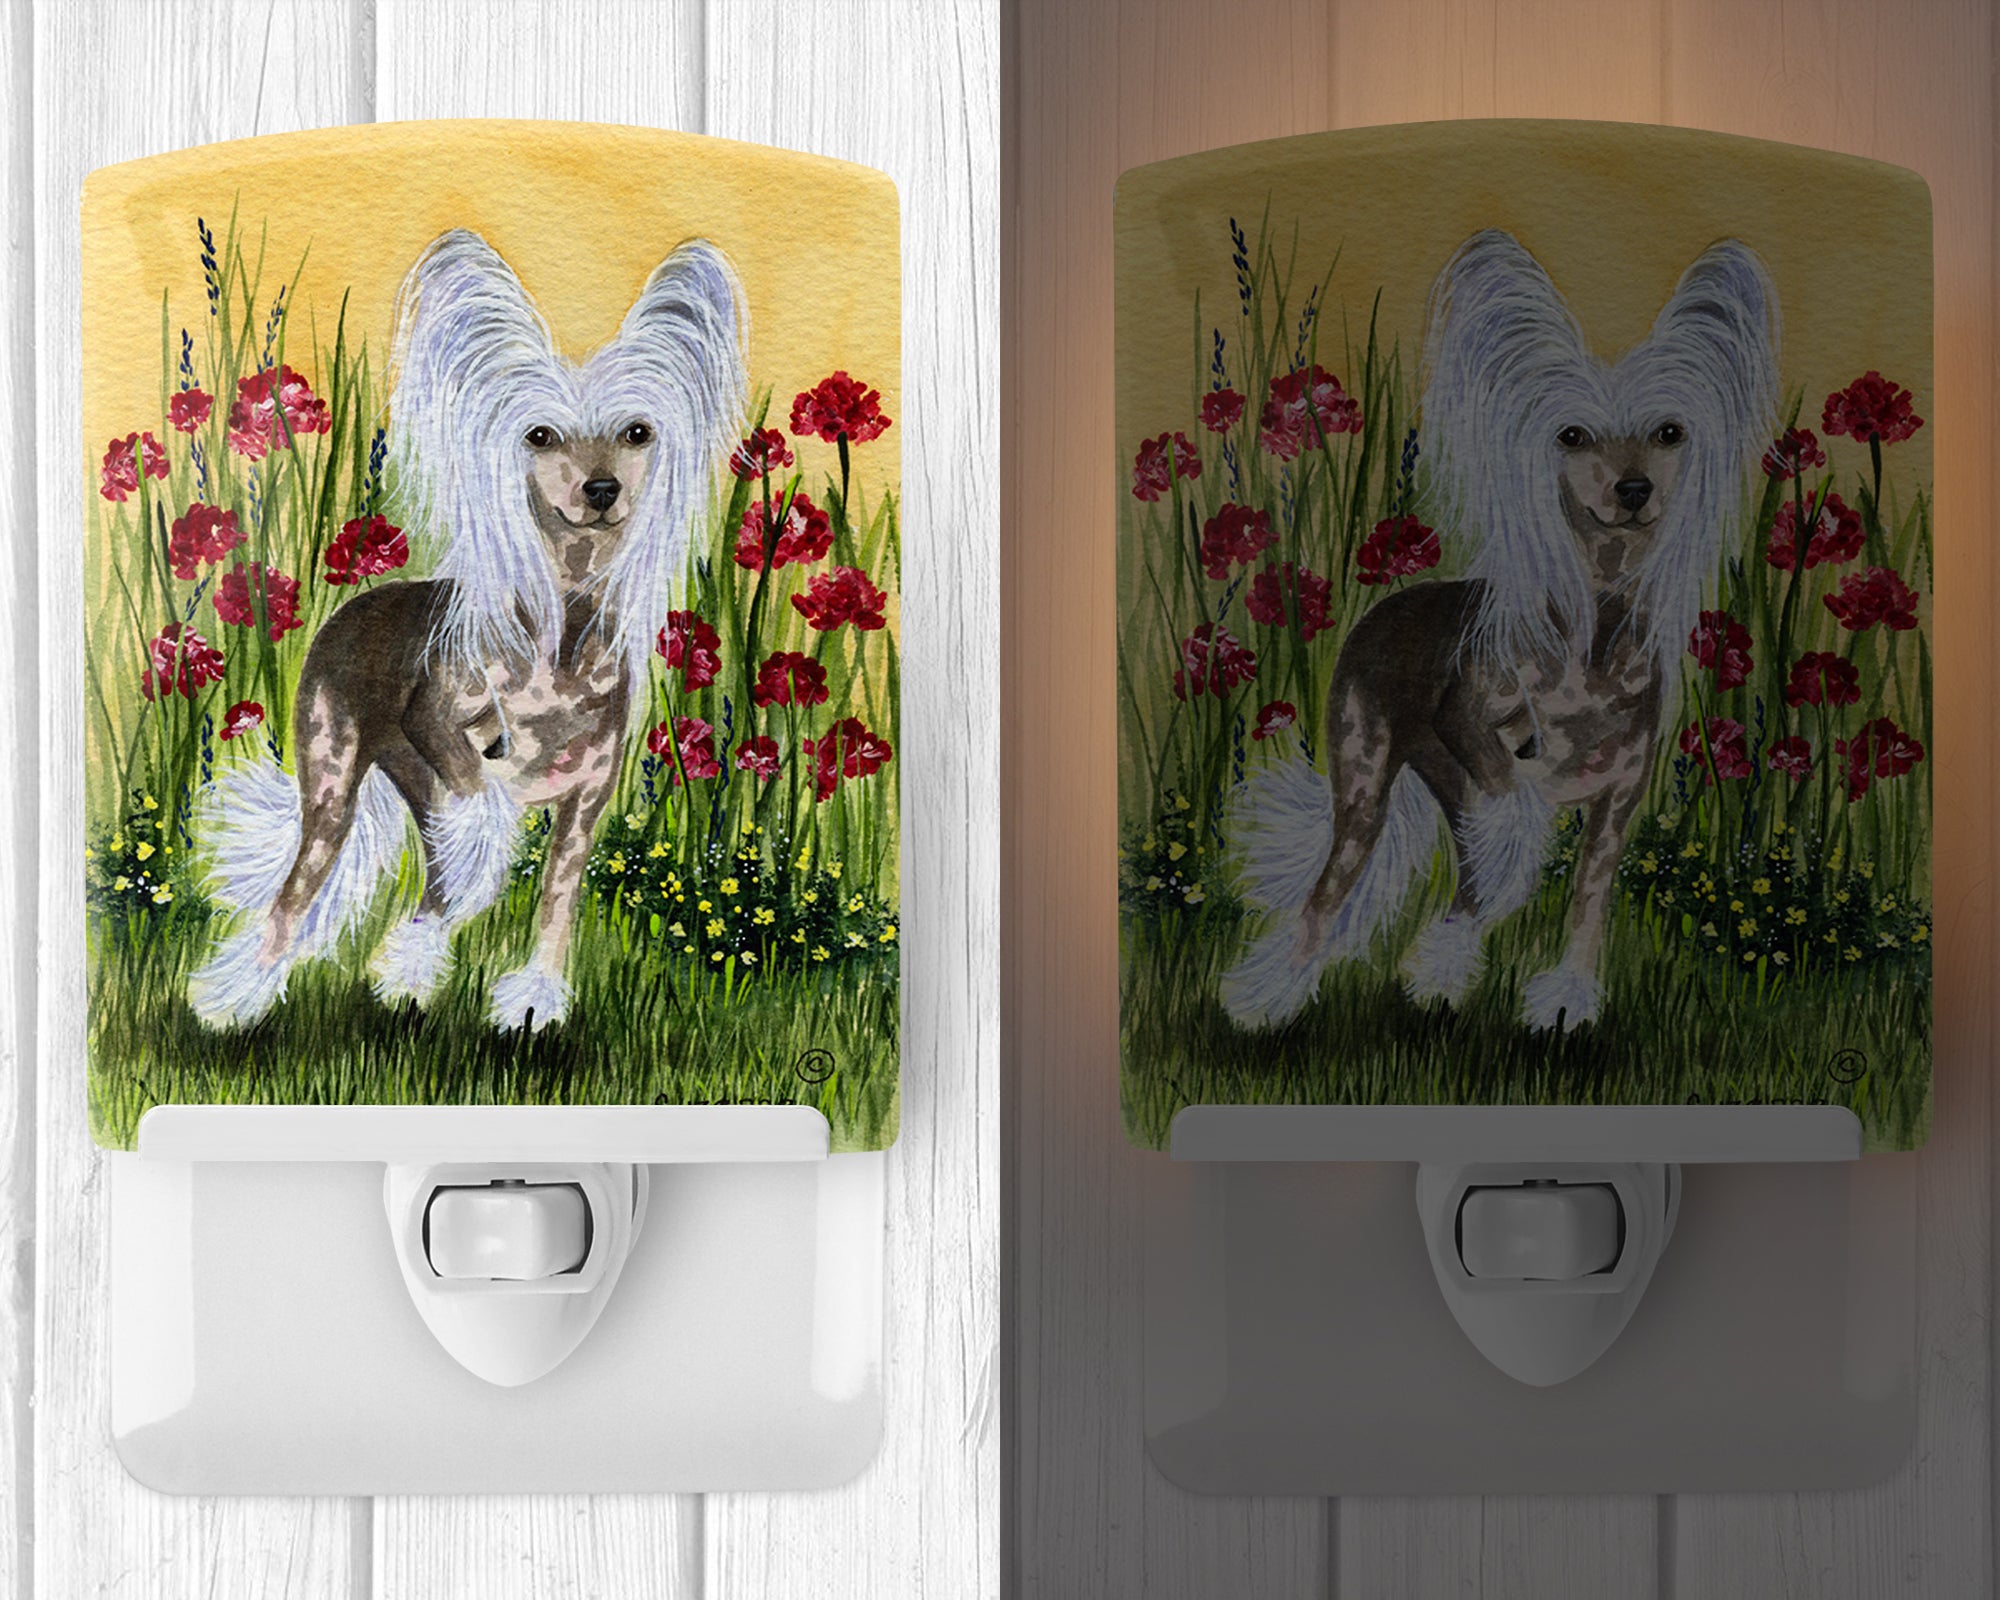 Chinese Crested Ceramic Night Light SS8185CNL - the-store.com